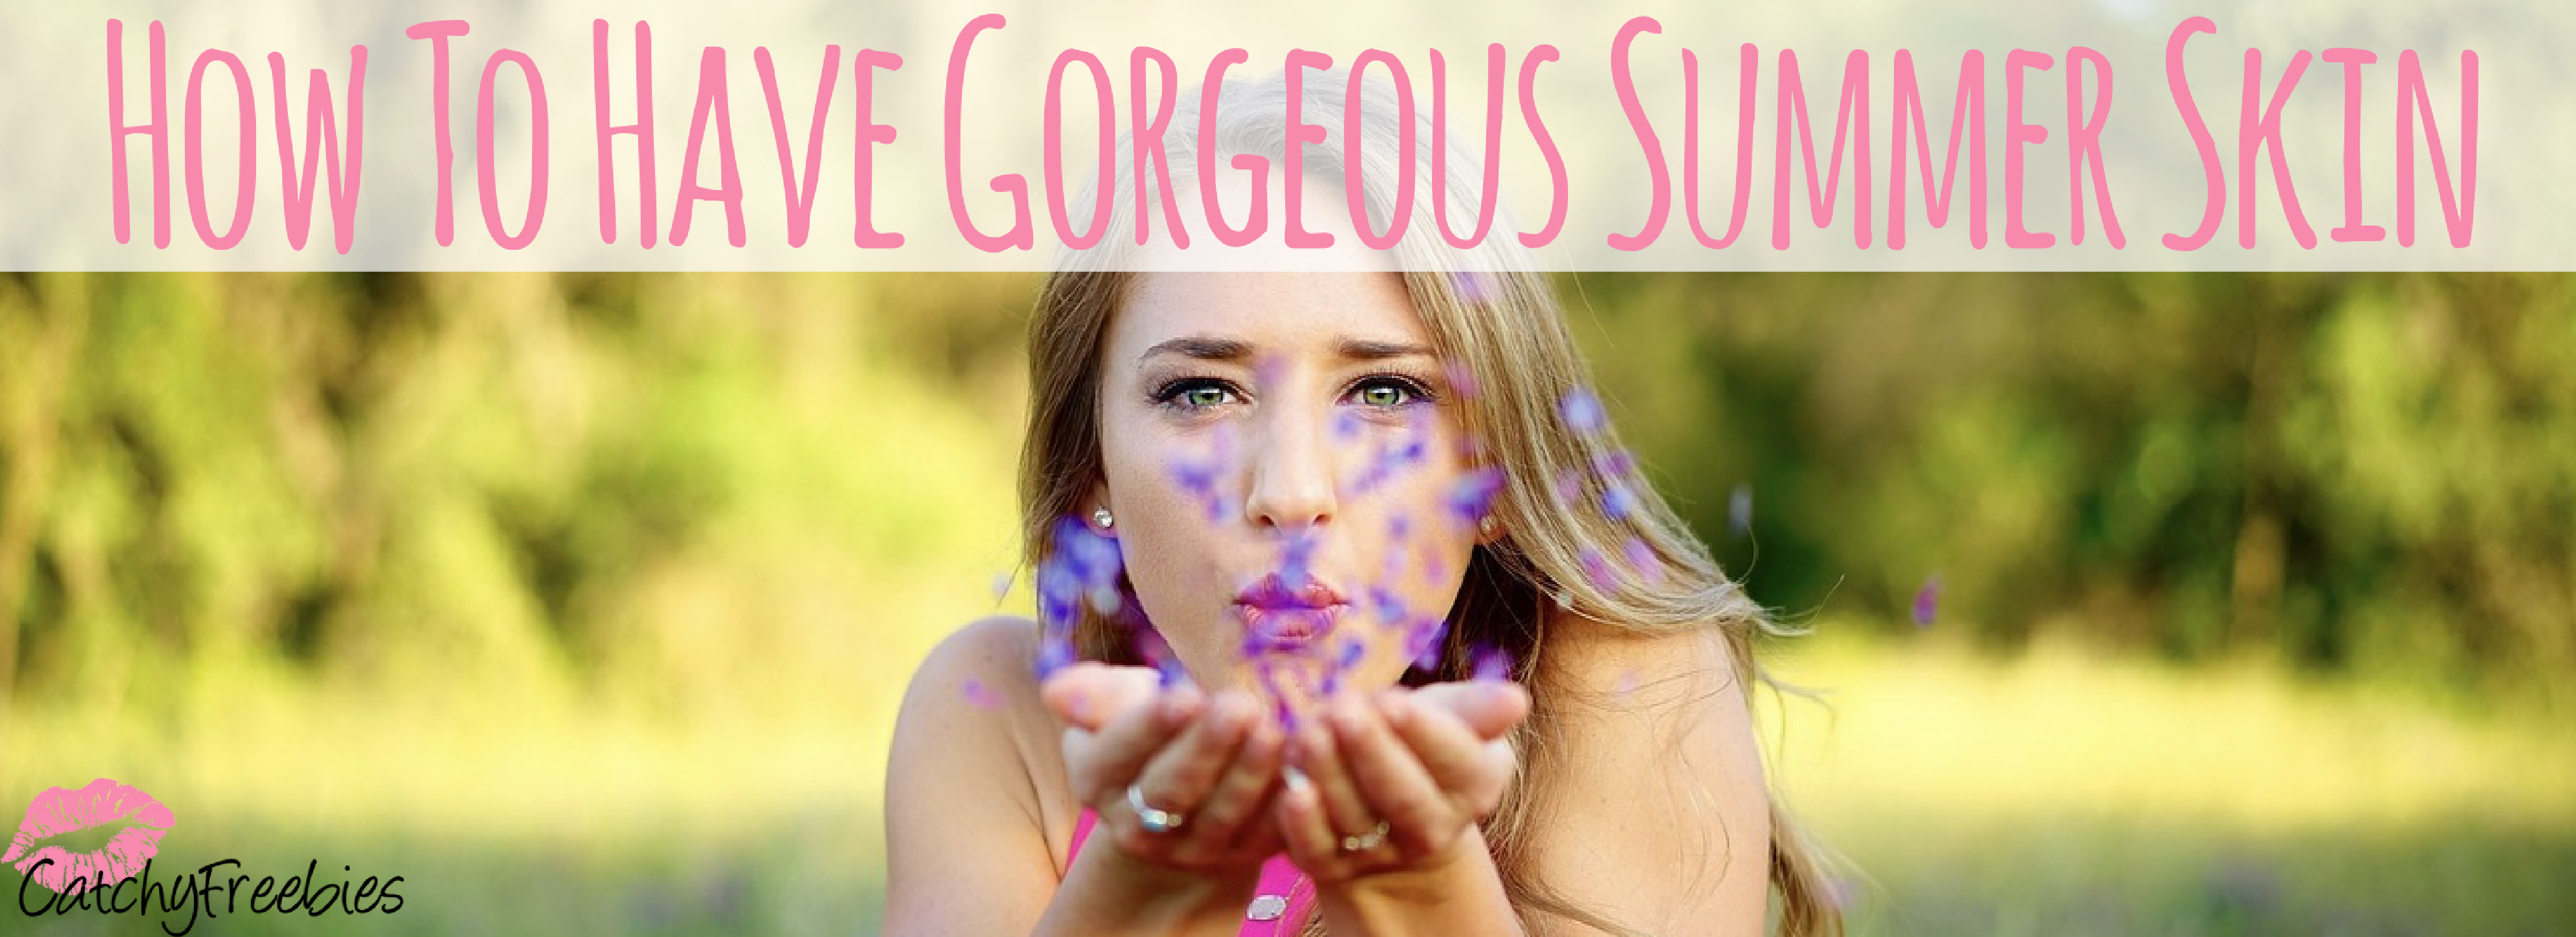 How To Have Gorgeous Summer Skin